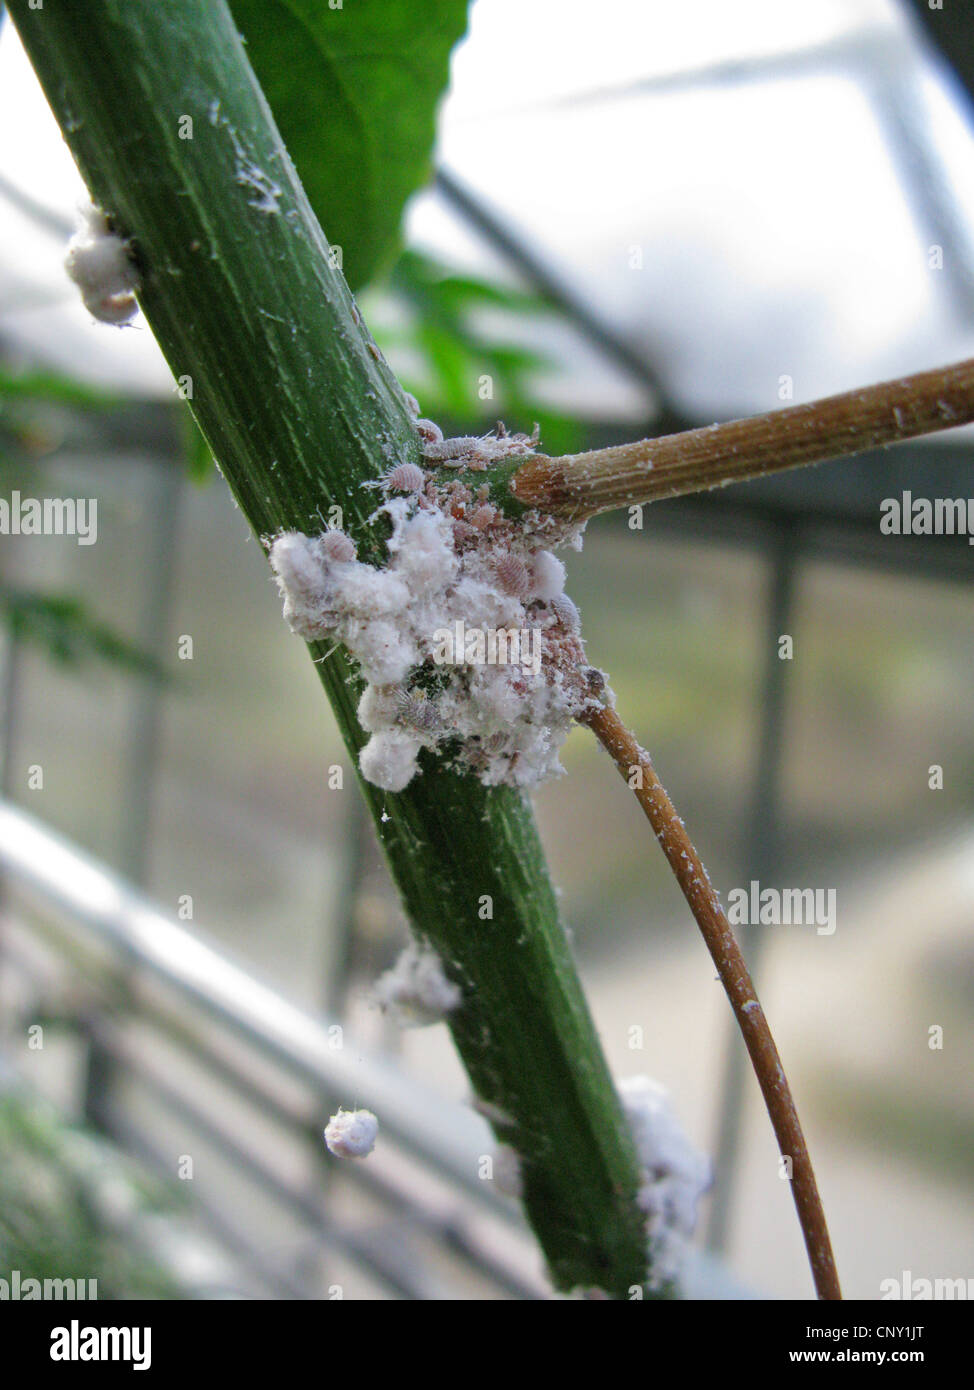 mealybugs (Pseudococcidae), at a plant in a greenhouse Stock Photo